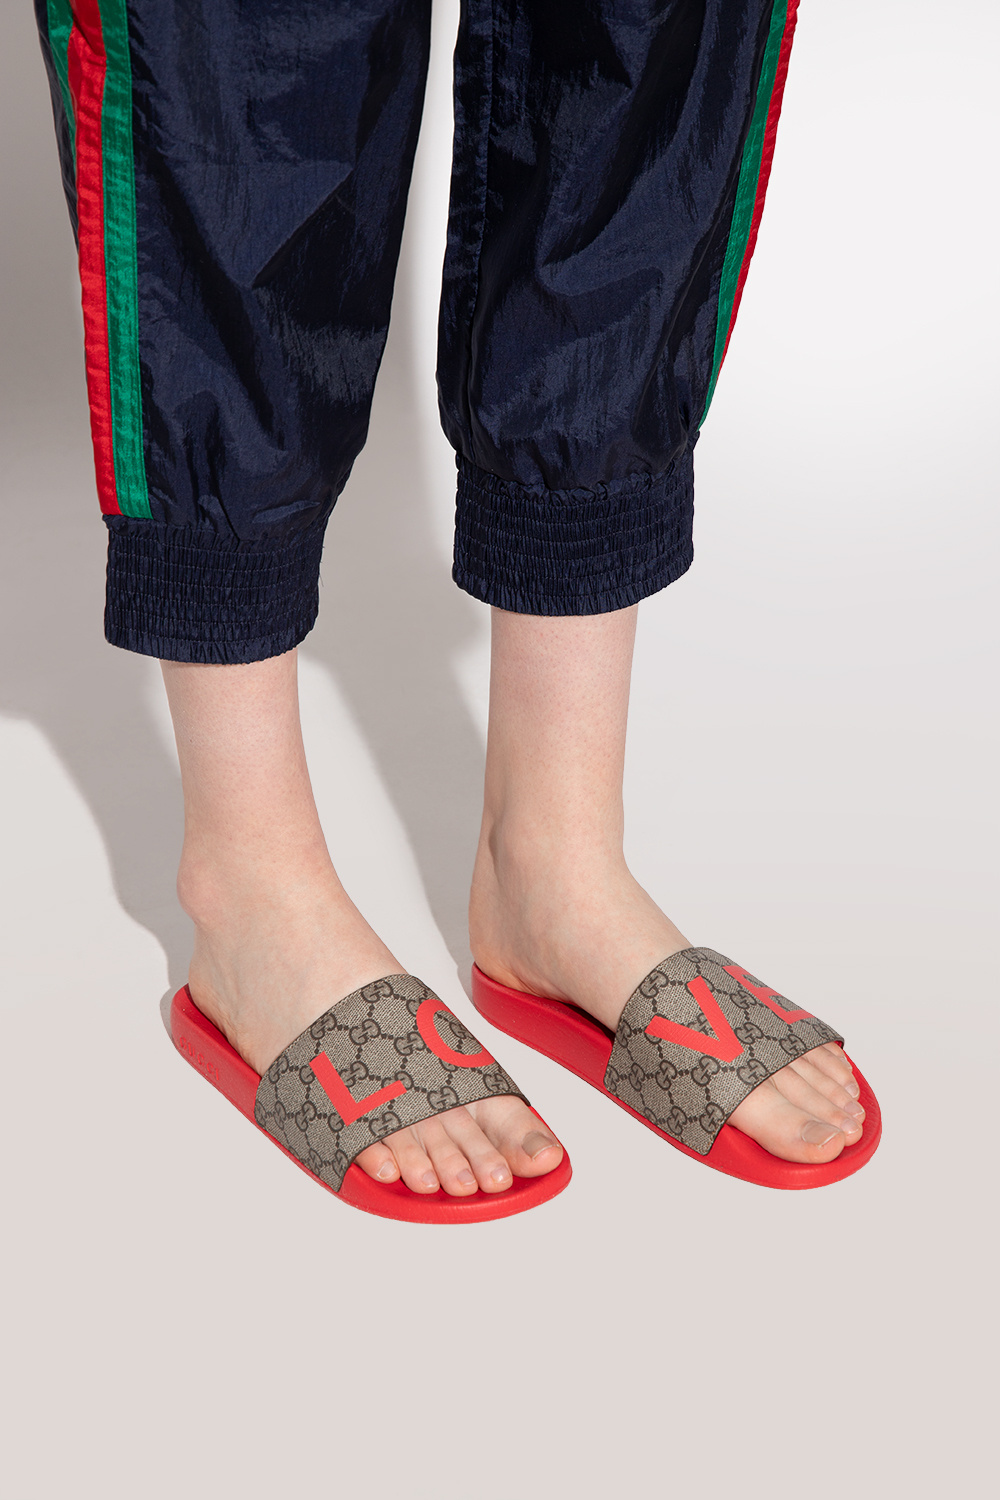 Gucci Slides from ‘Saint Valentine’ collection